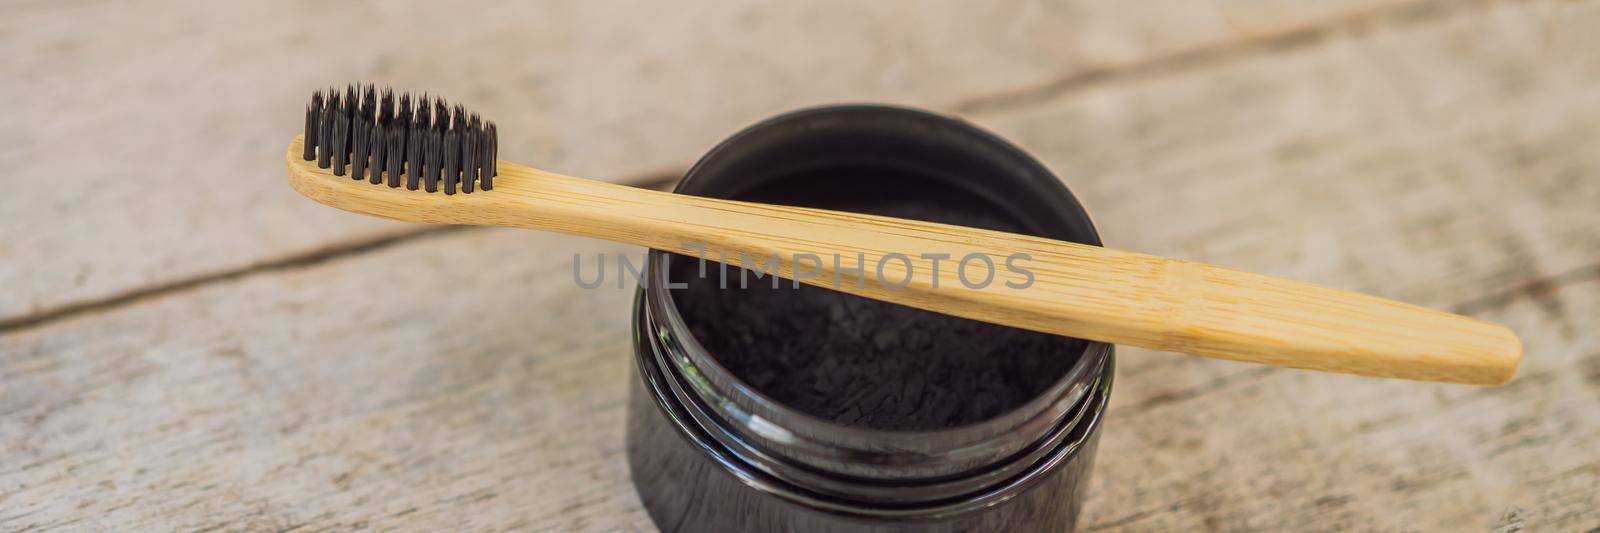 Activated charcoal powder for brushing and whitening teeth. Bamboo eco brush BANNER, LONG FORMAT by galitskaya